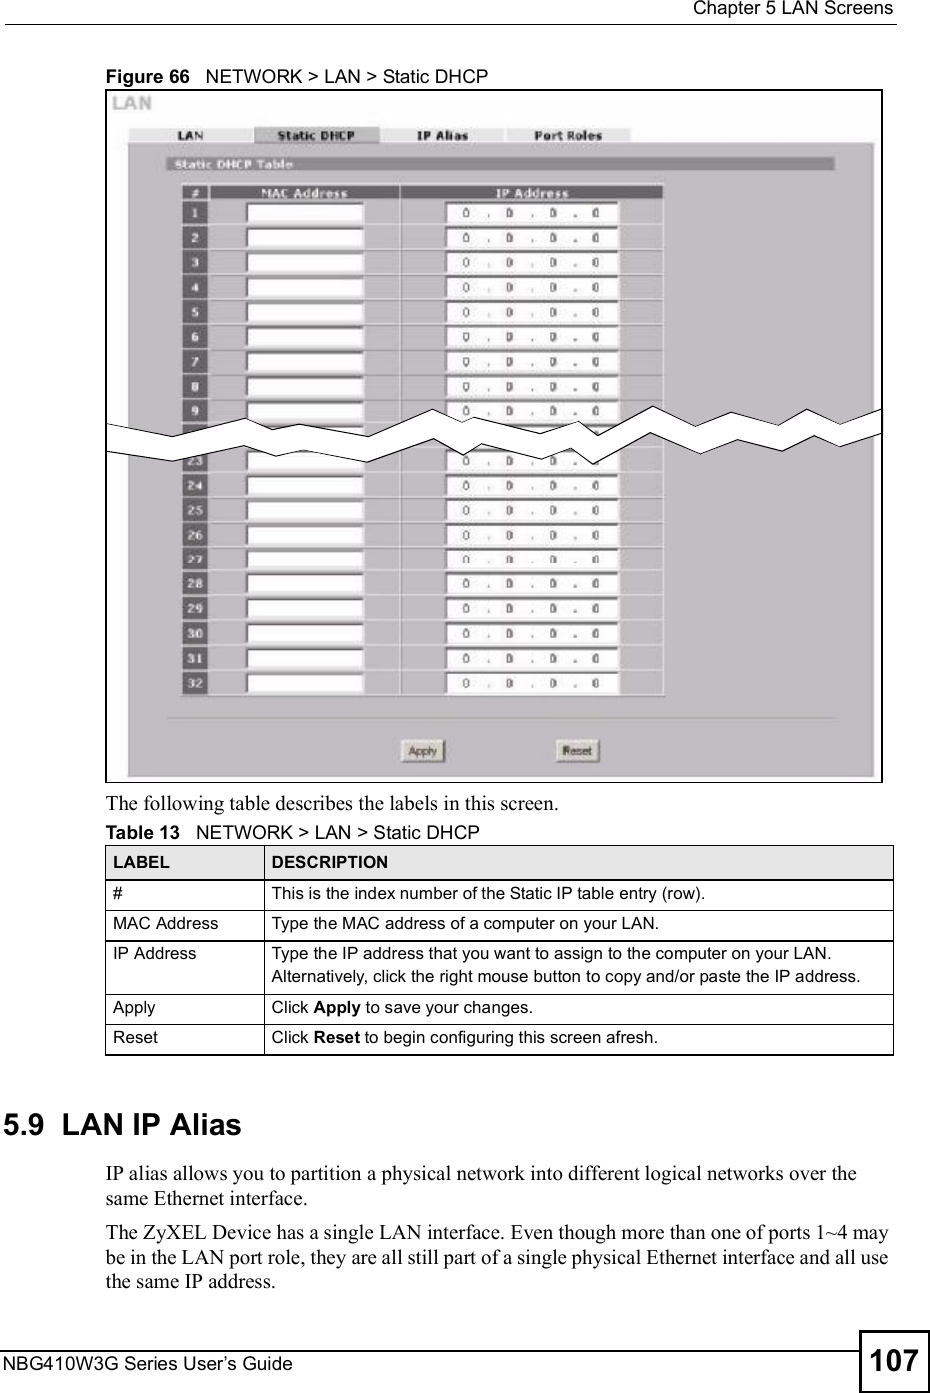  Chapter 5LAN ScreensNBG410W3G Series User s Guide 107Figure 66   NETWORK &gt; LAN &gt; Static DHCPThe following table describes the labels in this screen.5.9  LAN IP Alias  IP alias allows you to partition a physical network into different logical networks over the same Ethernet interface. The ZyXEL Device has a single LAN interface. Even though more than one of ports 1~4 may be in the LAN port role, they are all still part of a single physical Ethernet interface and all use the same IP address.Table 13   NETWORK &gt; LAN &gt; Static DHCPLABEL DESCRIPTION#This is the index number of the Static IP table entry (row).MAC AddressType the MAC address of a computer on your LAN.IP AddressType the IP address that you want to assign to the computer on your LAN.Alternatively, click the right mouse button to copy and/or paste the IP address.ApplyClick Apply to save your changes.ResetClick Reset to begin configuring this screen afresh.